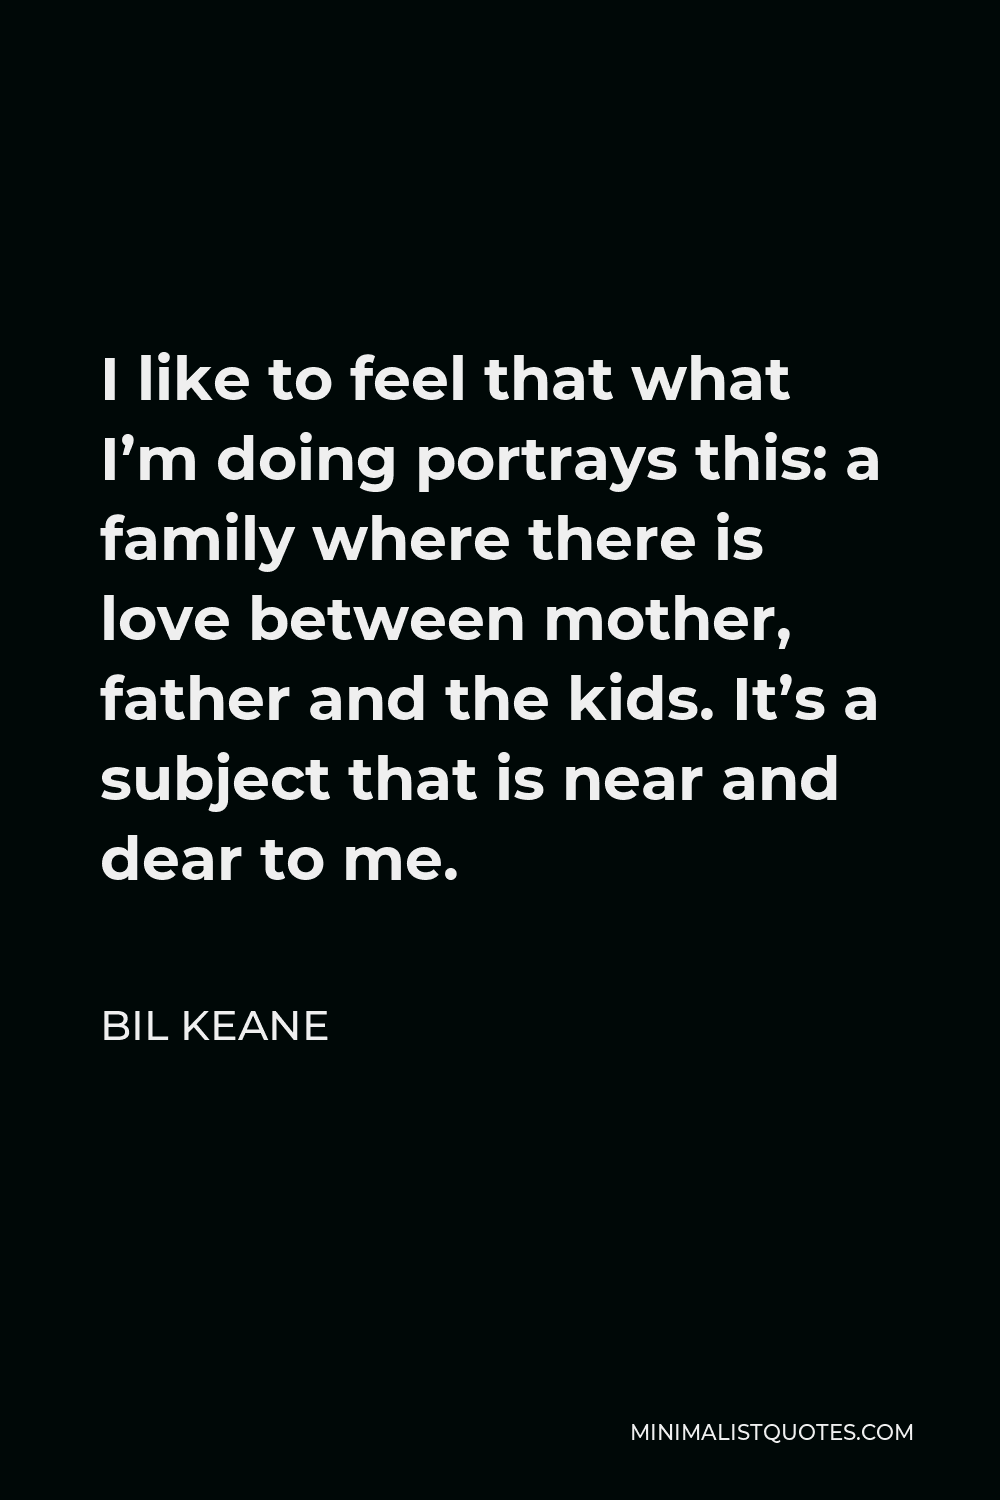 Bil Keane Quote - I like to feel that what I’m doing portrays this: a family where there is love between mother, father and the kids. It’s a subject that is near and dear to me.